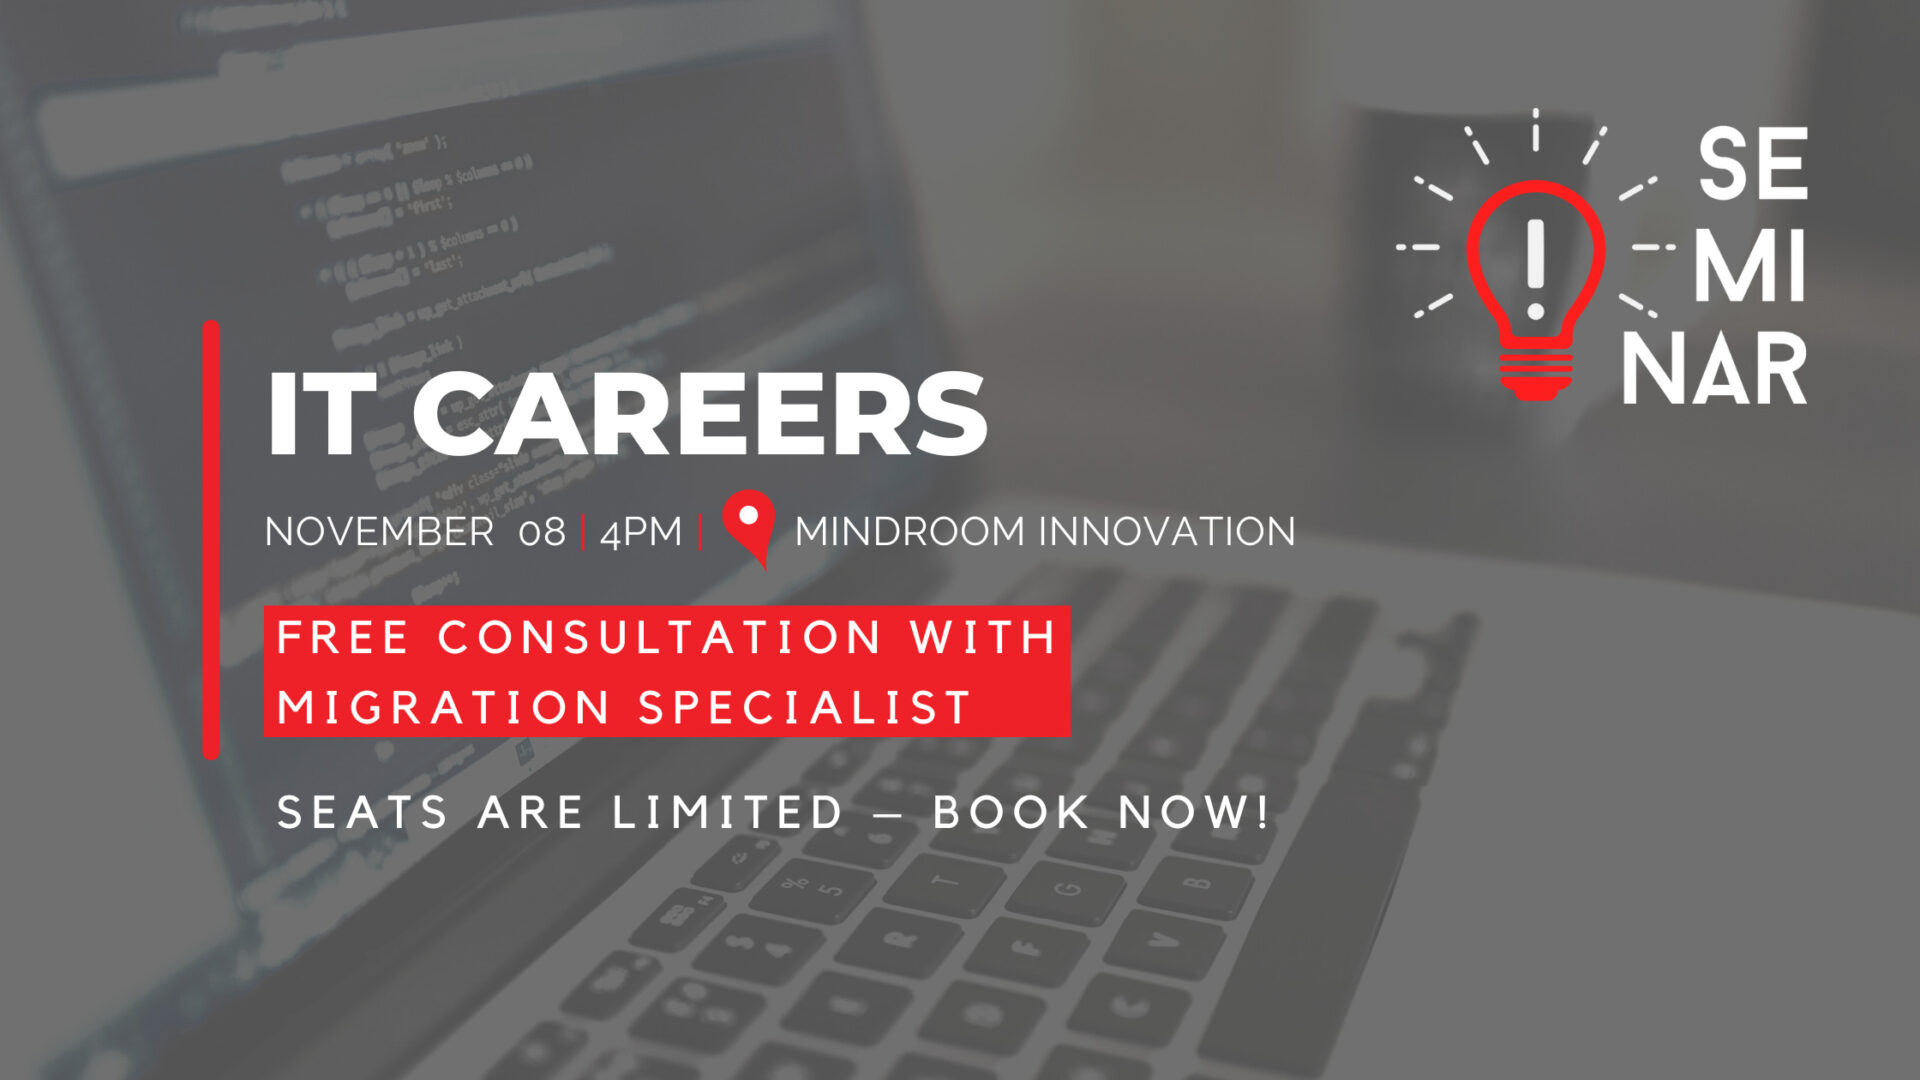 IT Careers Seminar & Free Consultation with Migration Specialist